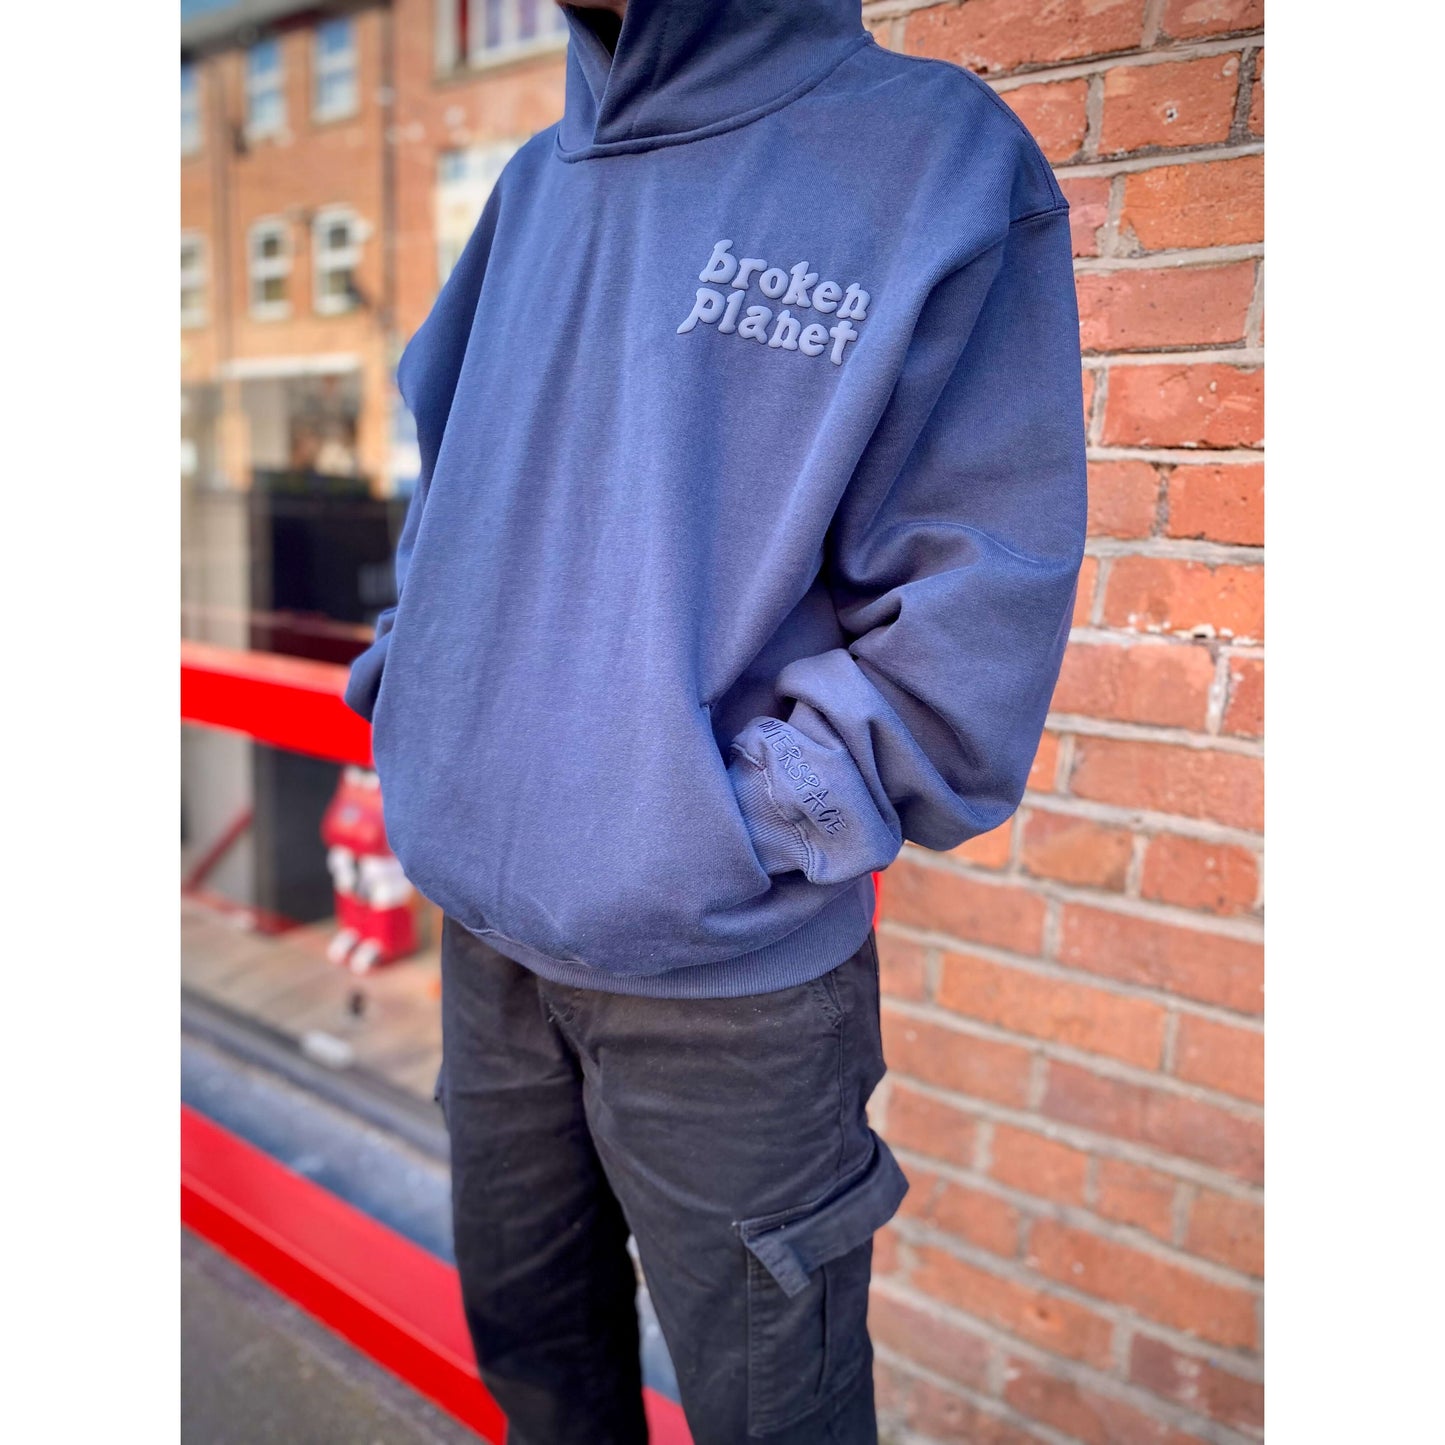 Broken Planet Market Basics Hoodie Outerspace Blue by Broken Planet Market from £140.00